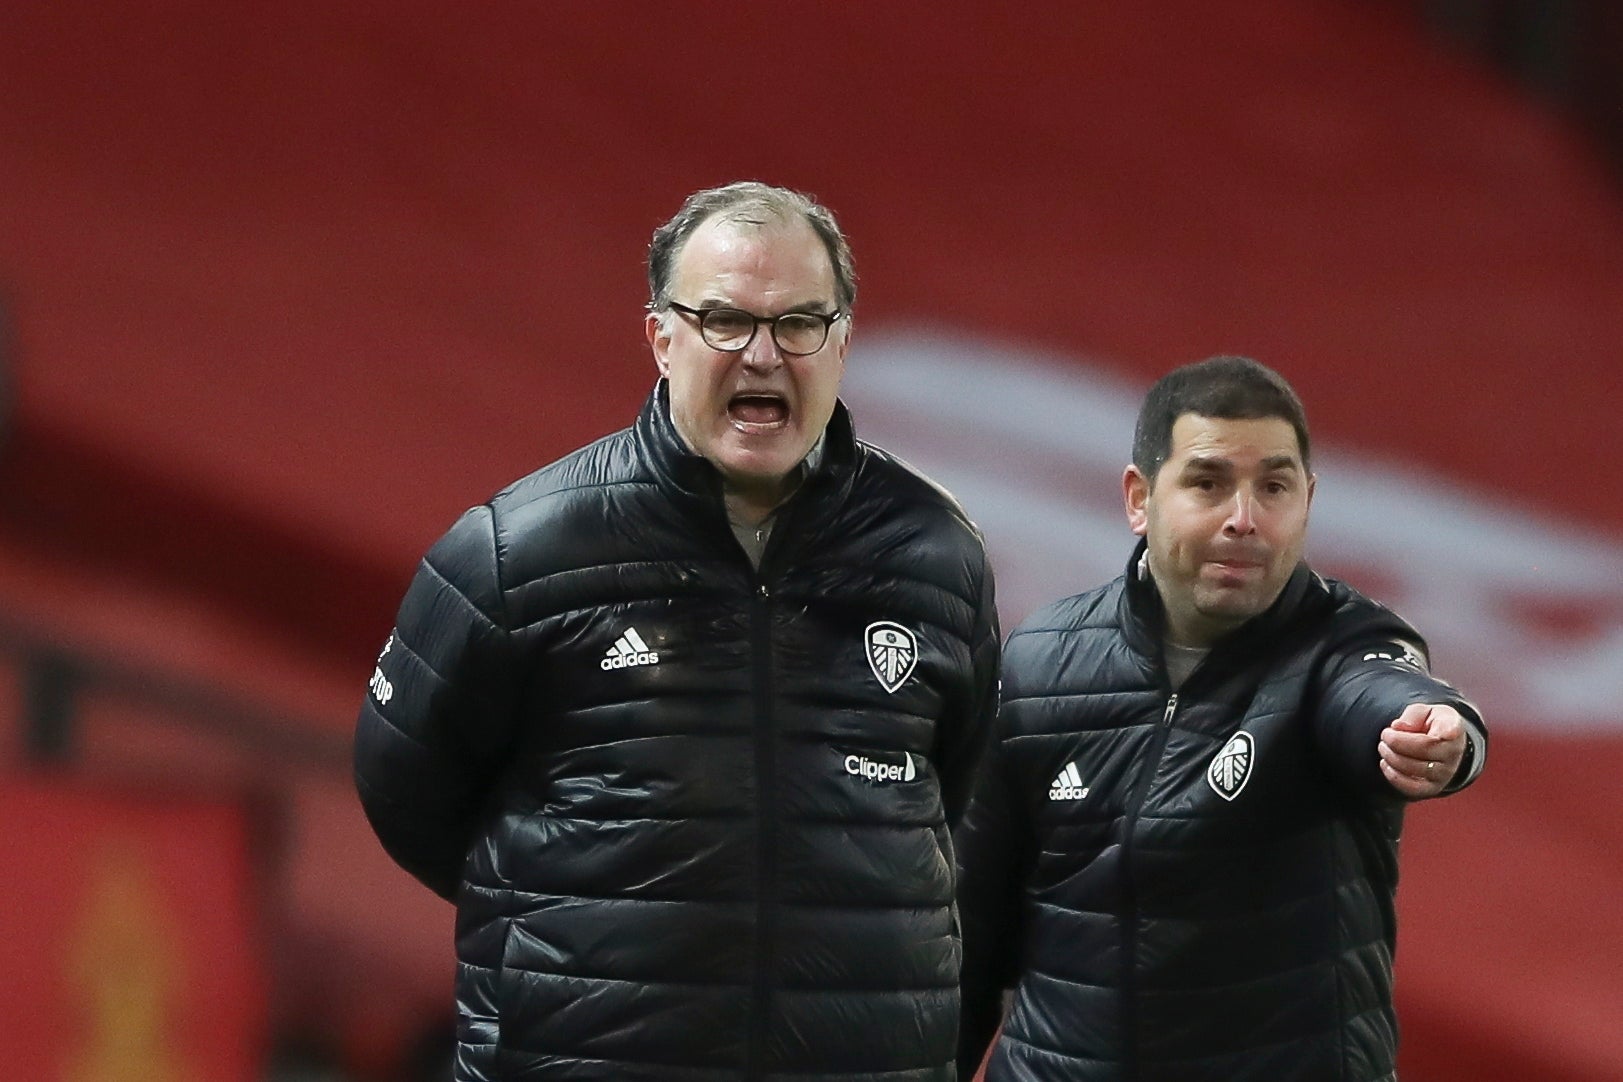 Marcelo Bielsa will not abandon his philosophy at Leeds despite shipping six goals at Manchester United